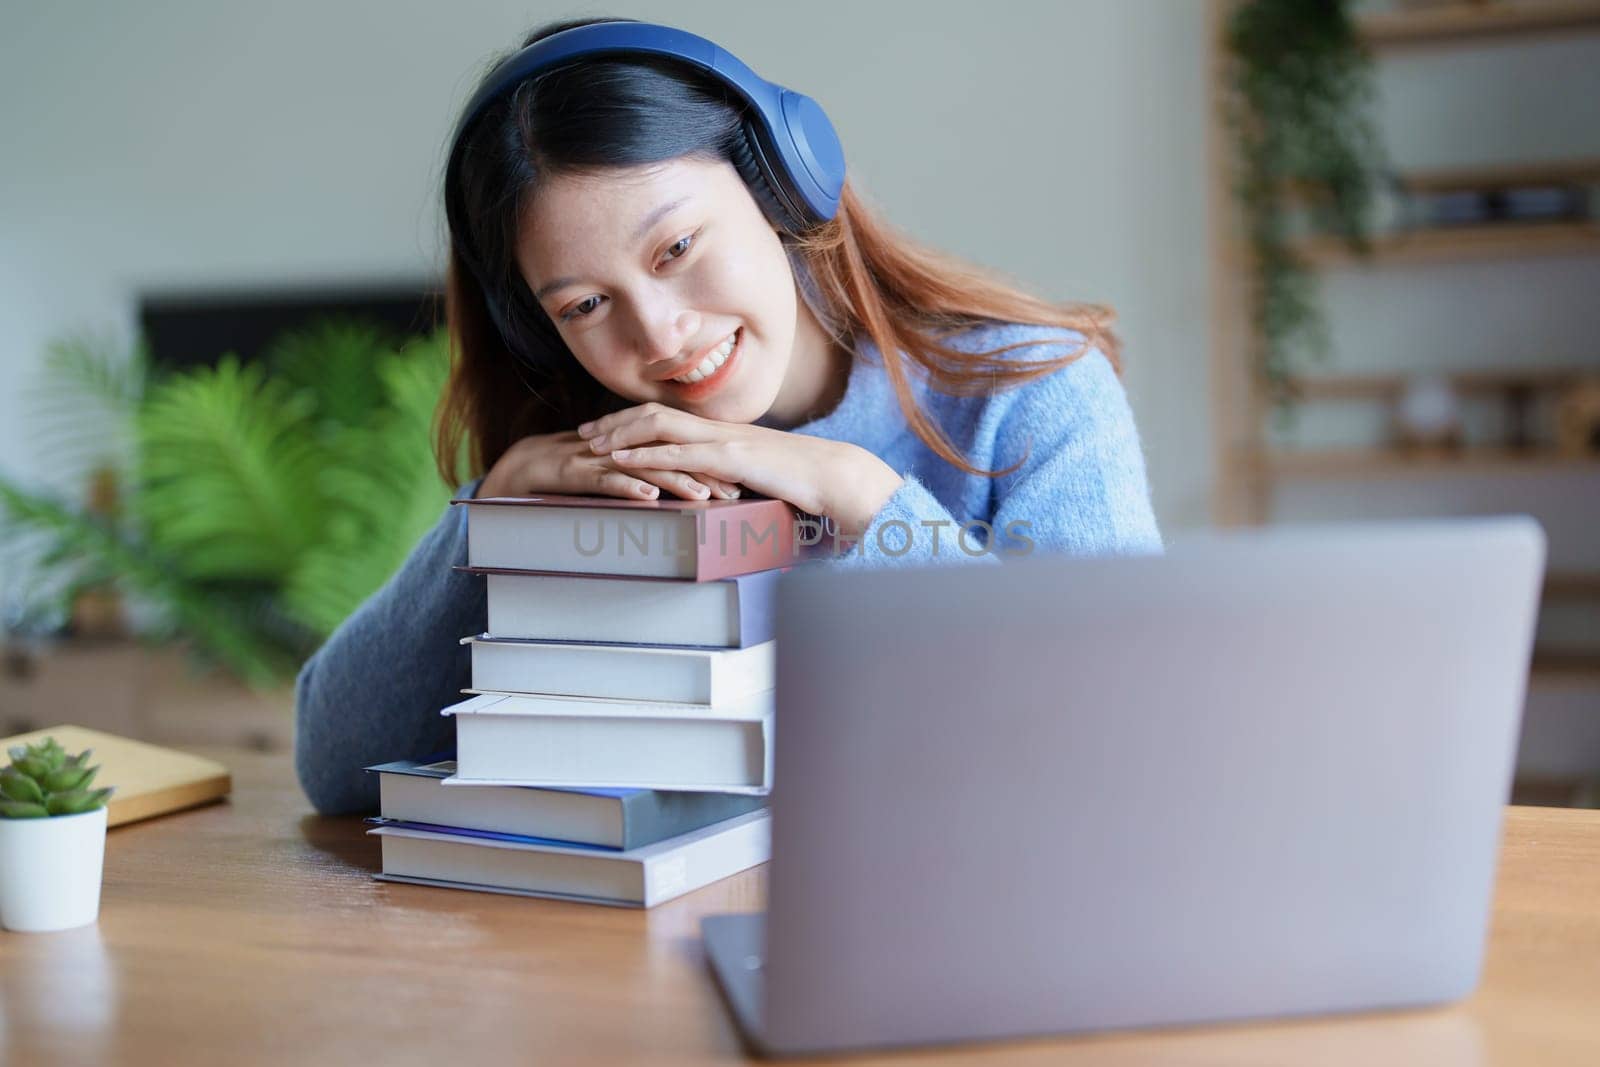 Portrait of young beautiful Asian woman showing smiling face during early morning online class with books, headphones and computer as study materials at home.